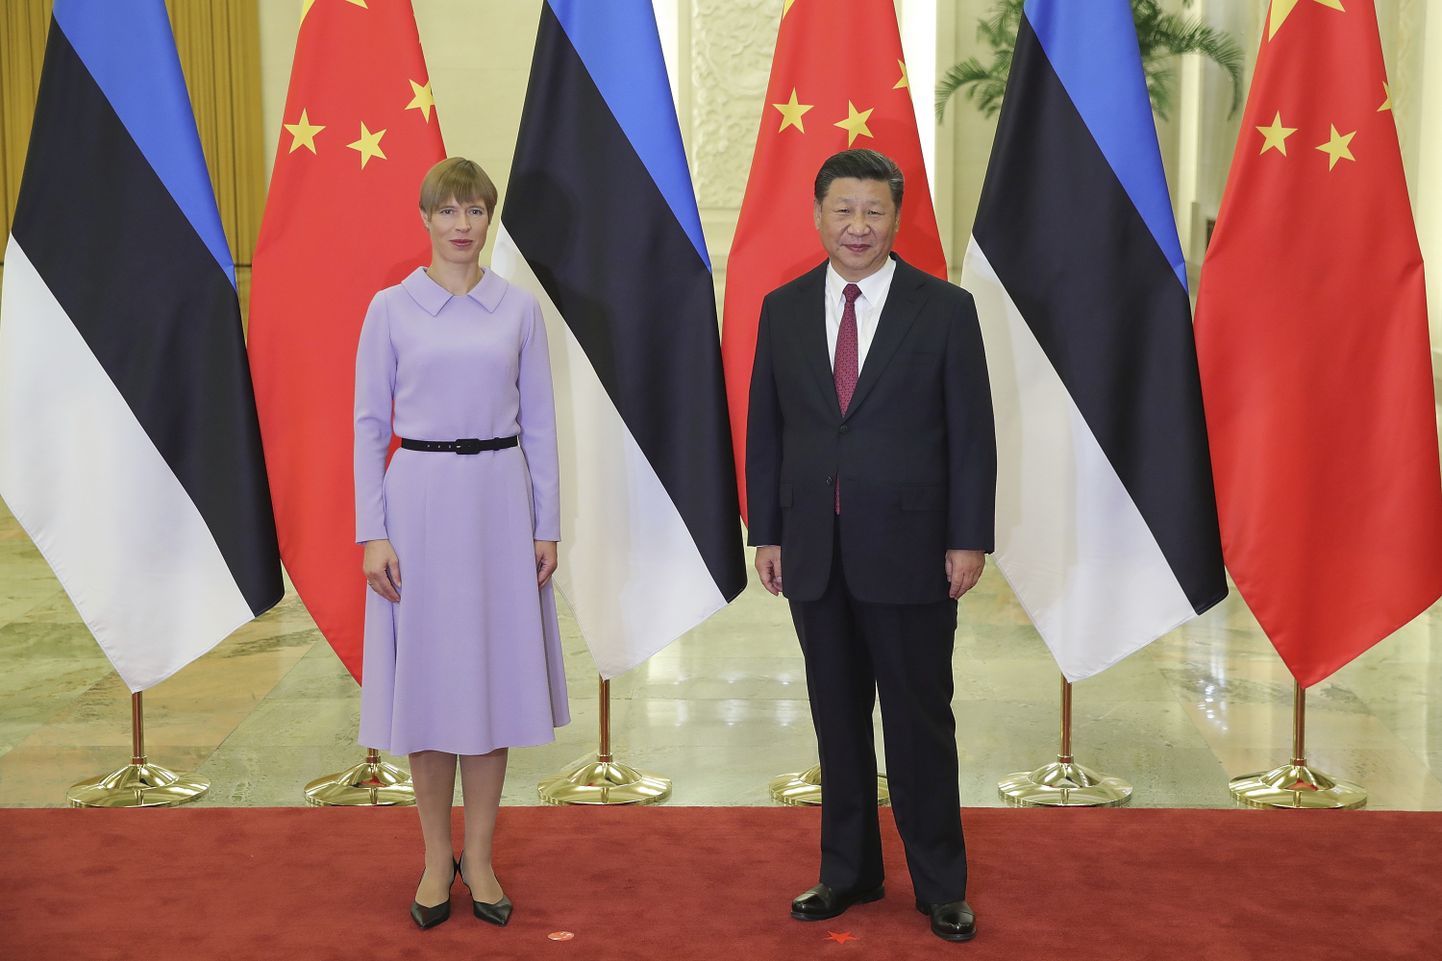 President of Estonia Kersti Kaljulaid, left, shakes hands with Chinese President Xi Jinping at the Great Hall Of The People on Tuesday, Sept. 18, 2018, in Beijing. (Lintao Zhang/Pool Photo via AP)